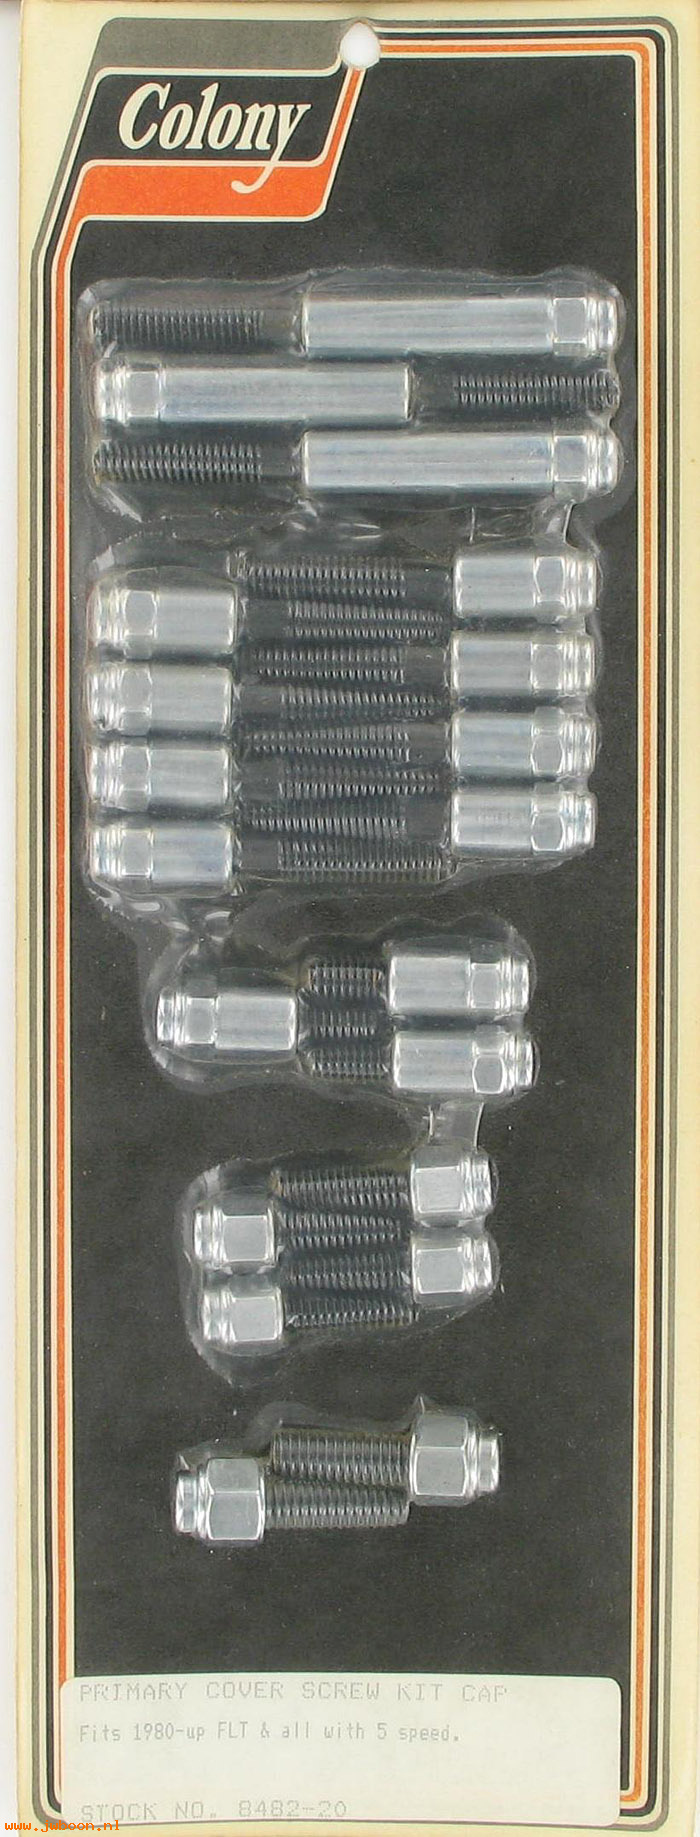 C 8482-20 (): Primary cover screws - Big Twins '80-'84, 5-speed,Colony in stock